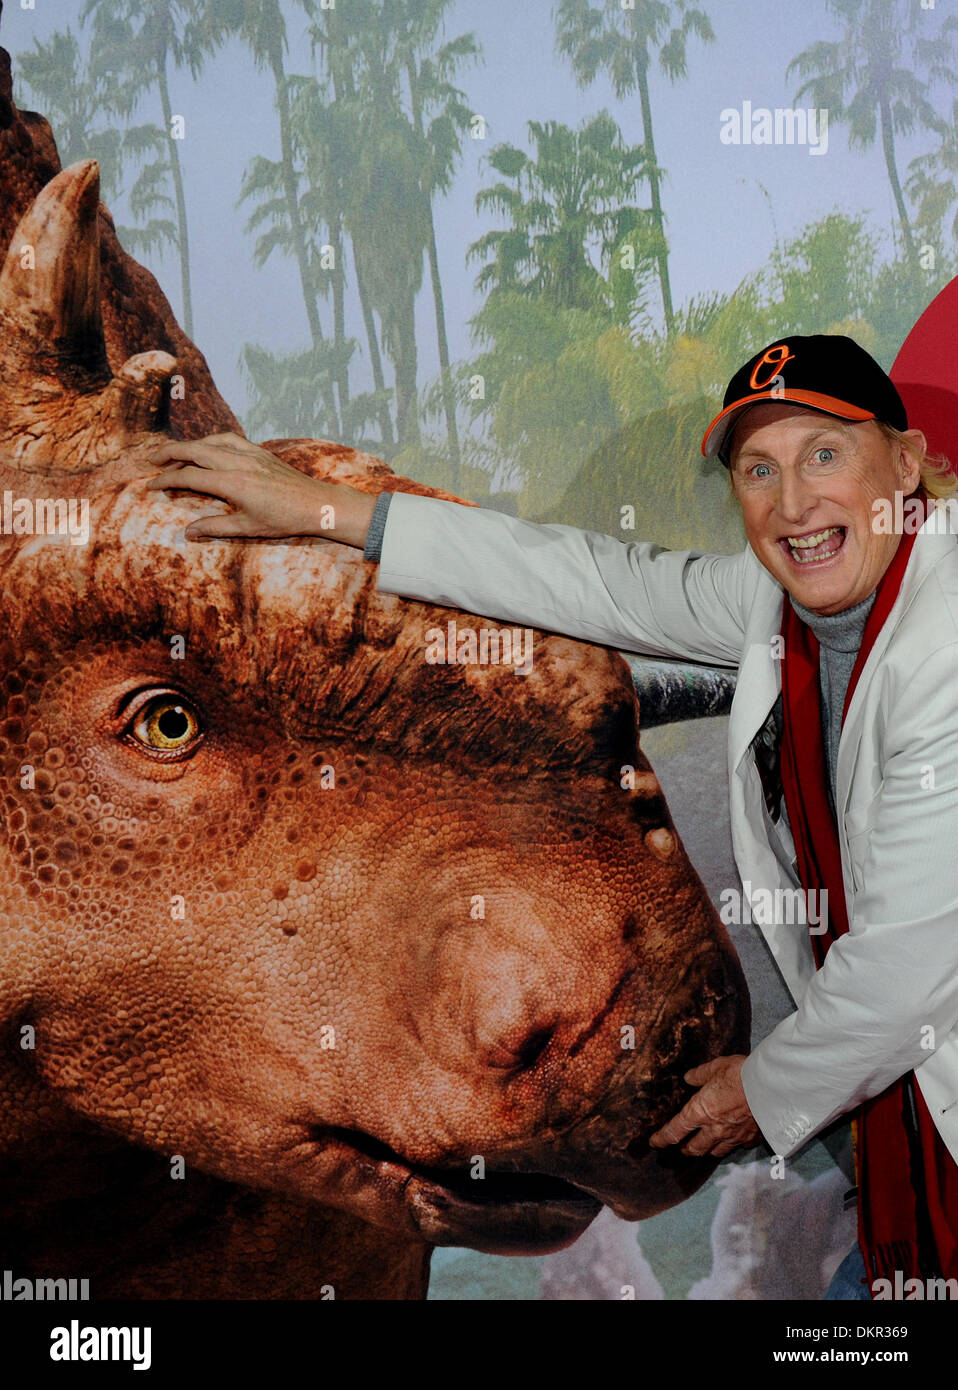 Munich, Germany. 08th Dec, 2013. Comedian Otto Waalkes arrives to the German premiere of the 3D film 'Walking with Dinosaurs' (German title: Dinosaurier 3D - Im Reich der Giganten) in Munich, Germany, 08 December 2013. Otto Waalkes is the voice of the bird 'Alex' in the German language version of the film. The film will open in German theatres on 19 December 2013. Photo: URSULA DUEREN/dpa/Alamy Live News Stock Photo